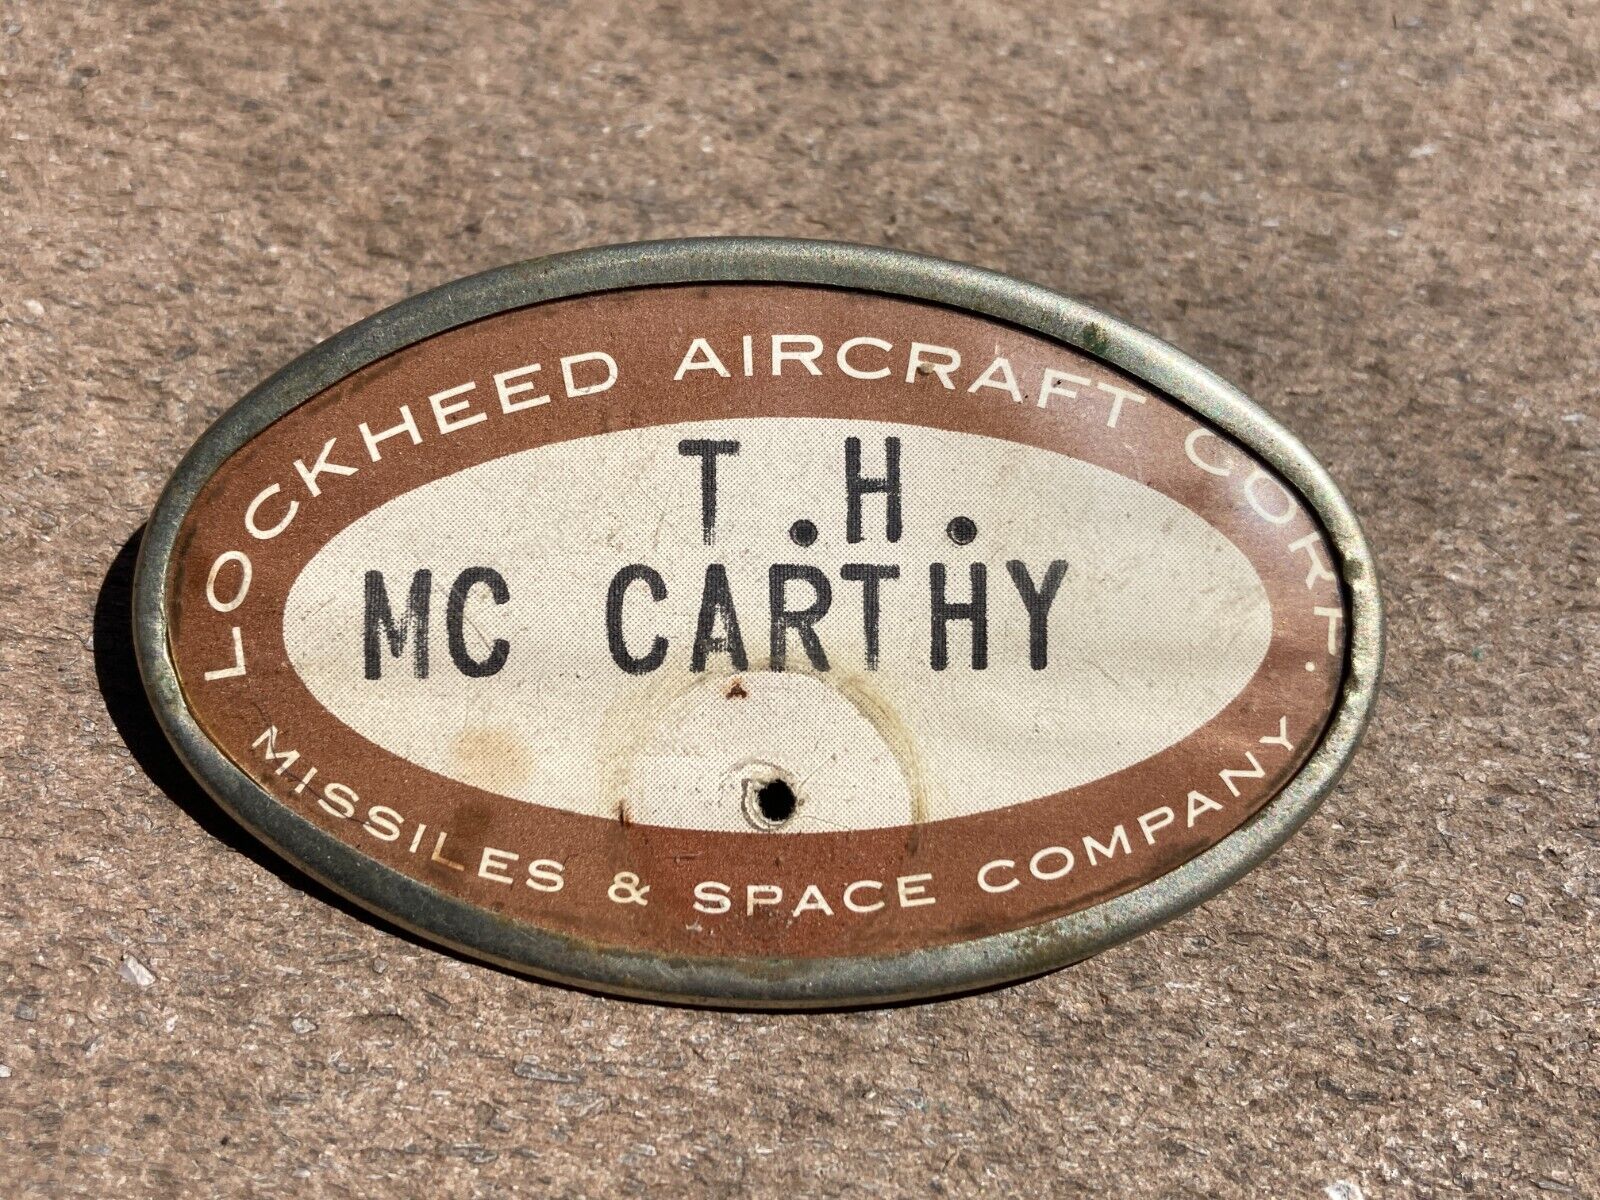 Early 1950s Lockheed Aircraft Missile & Space Identification Worker ID Badge